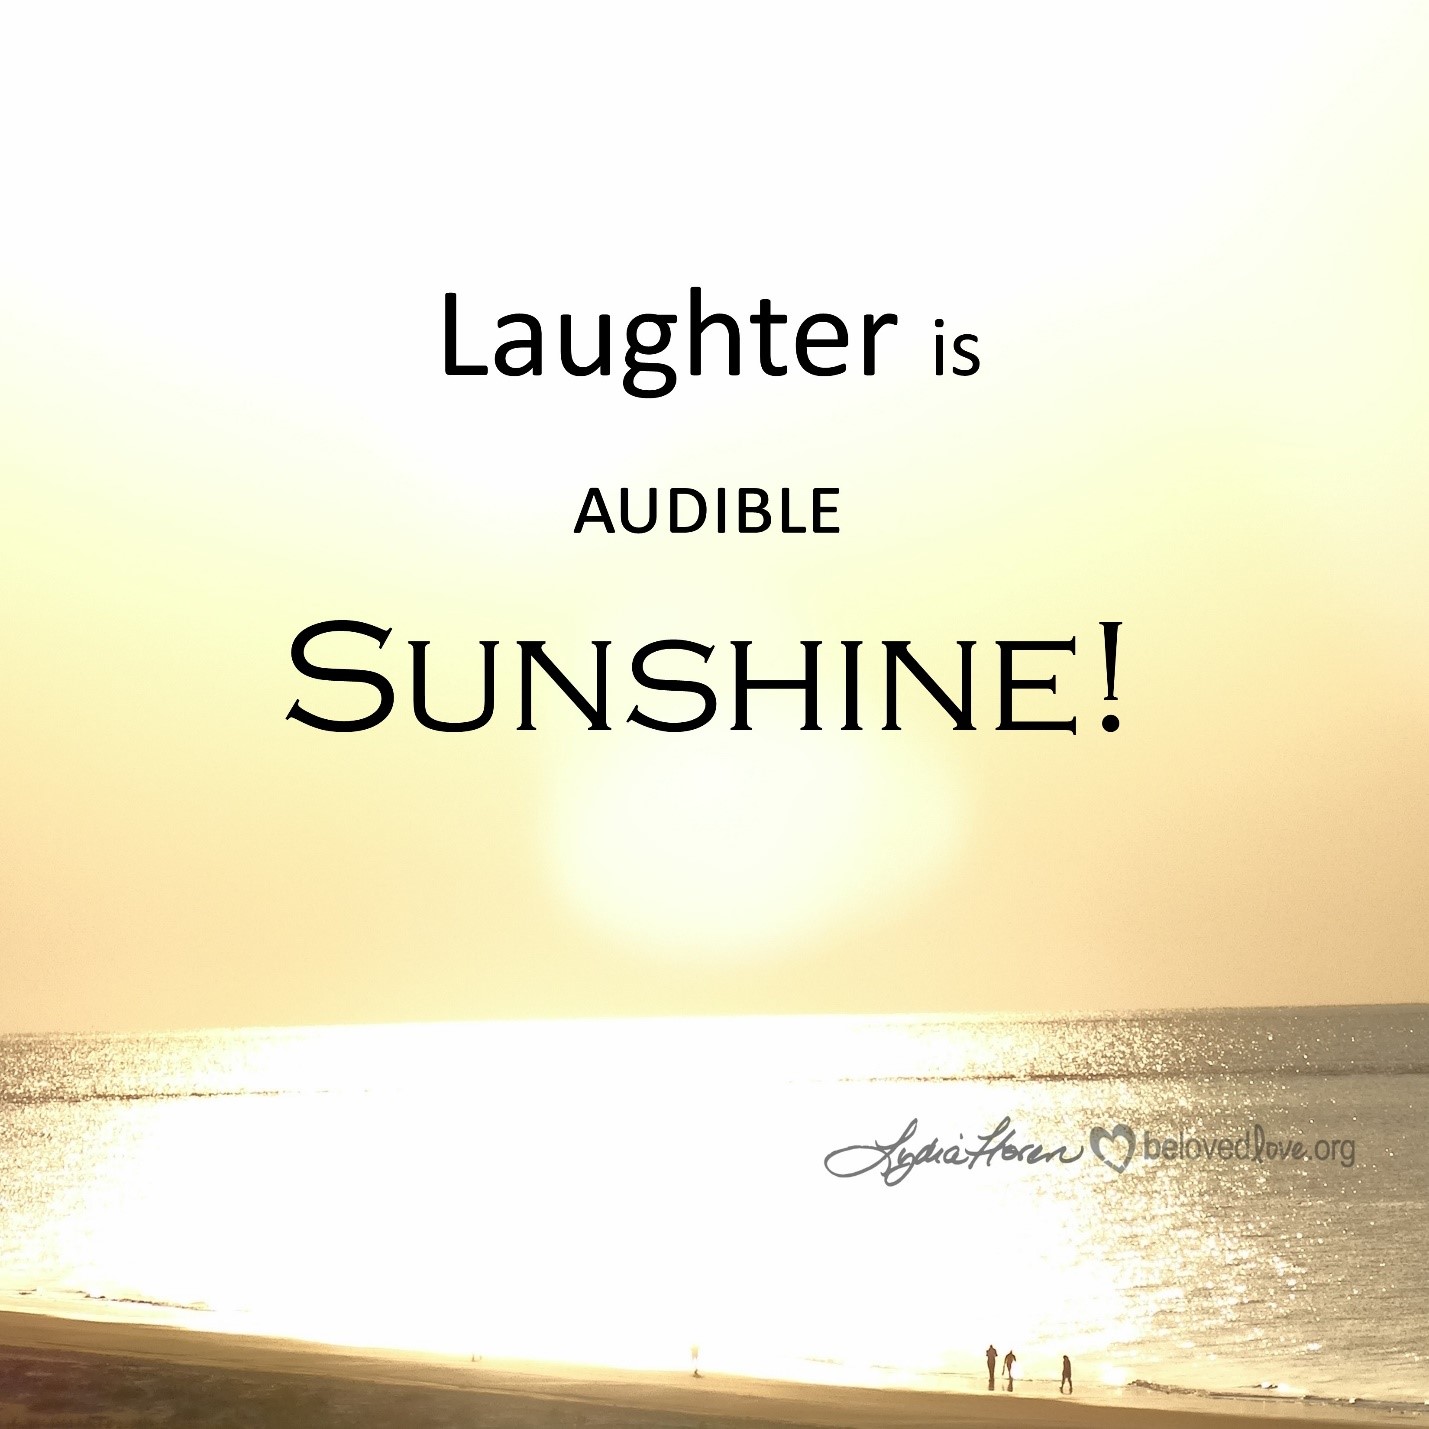 laughter is audible sunshine